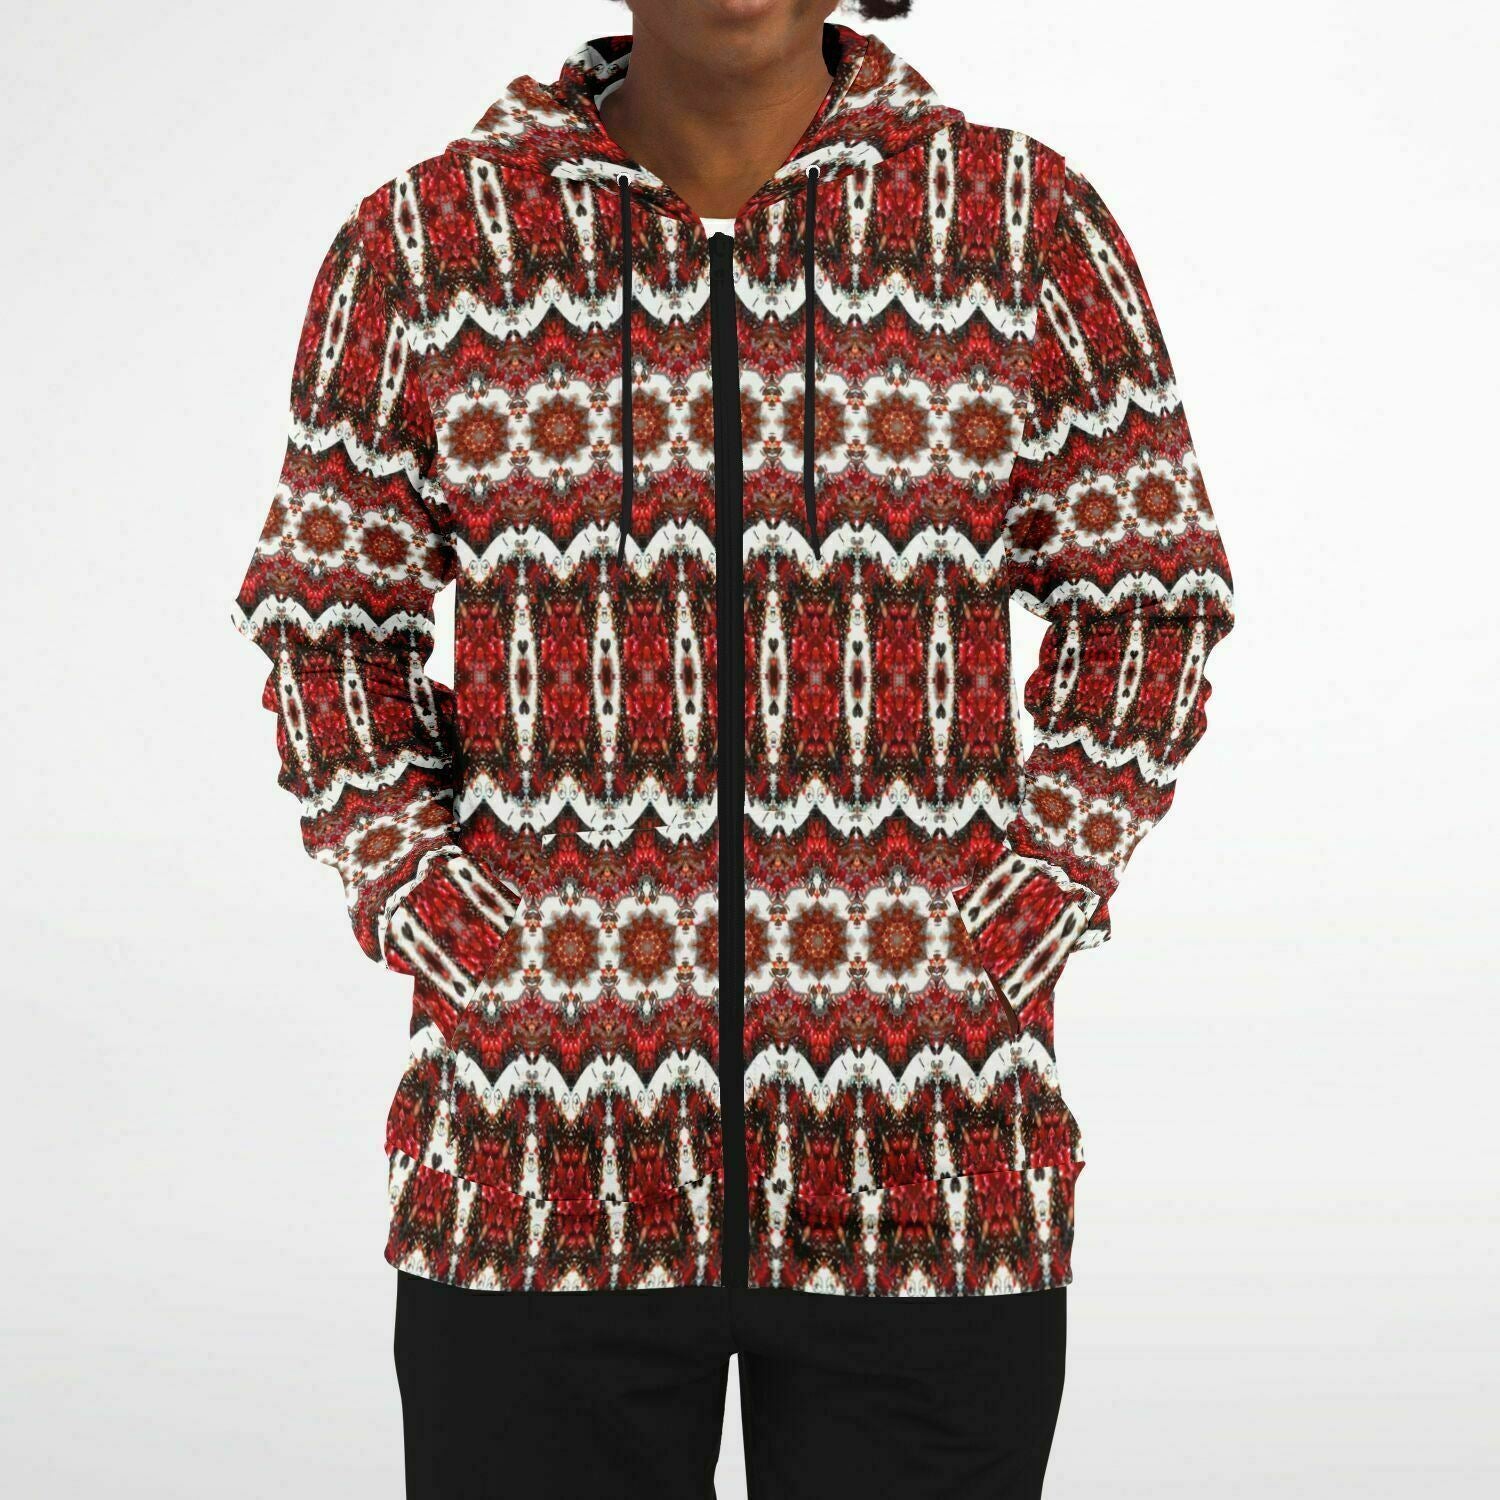 Canada Hoodie in white and red abstract